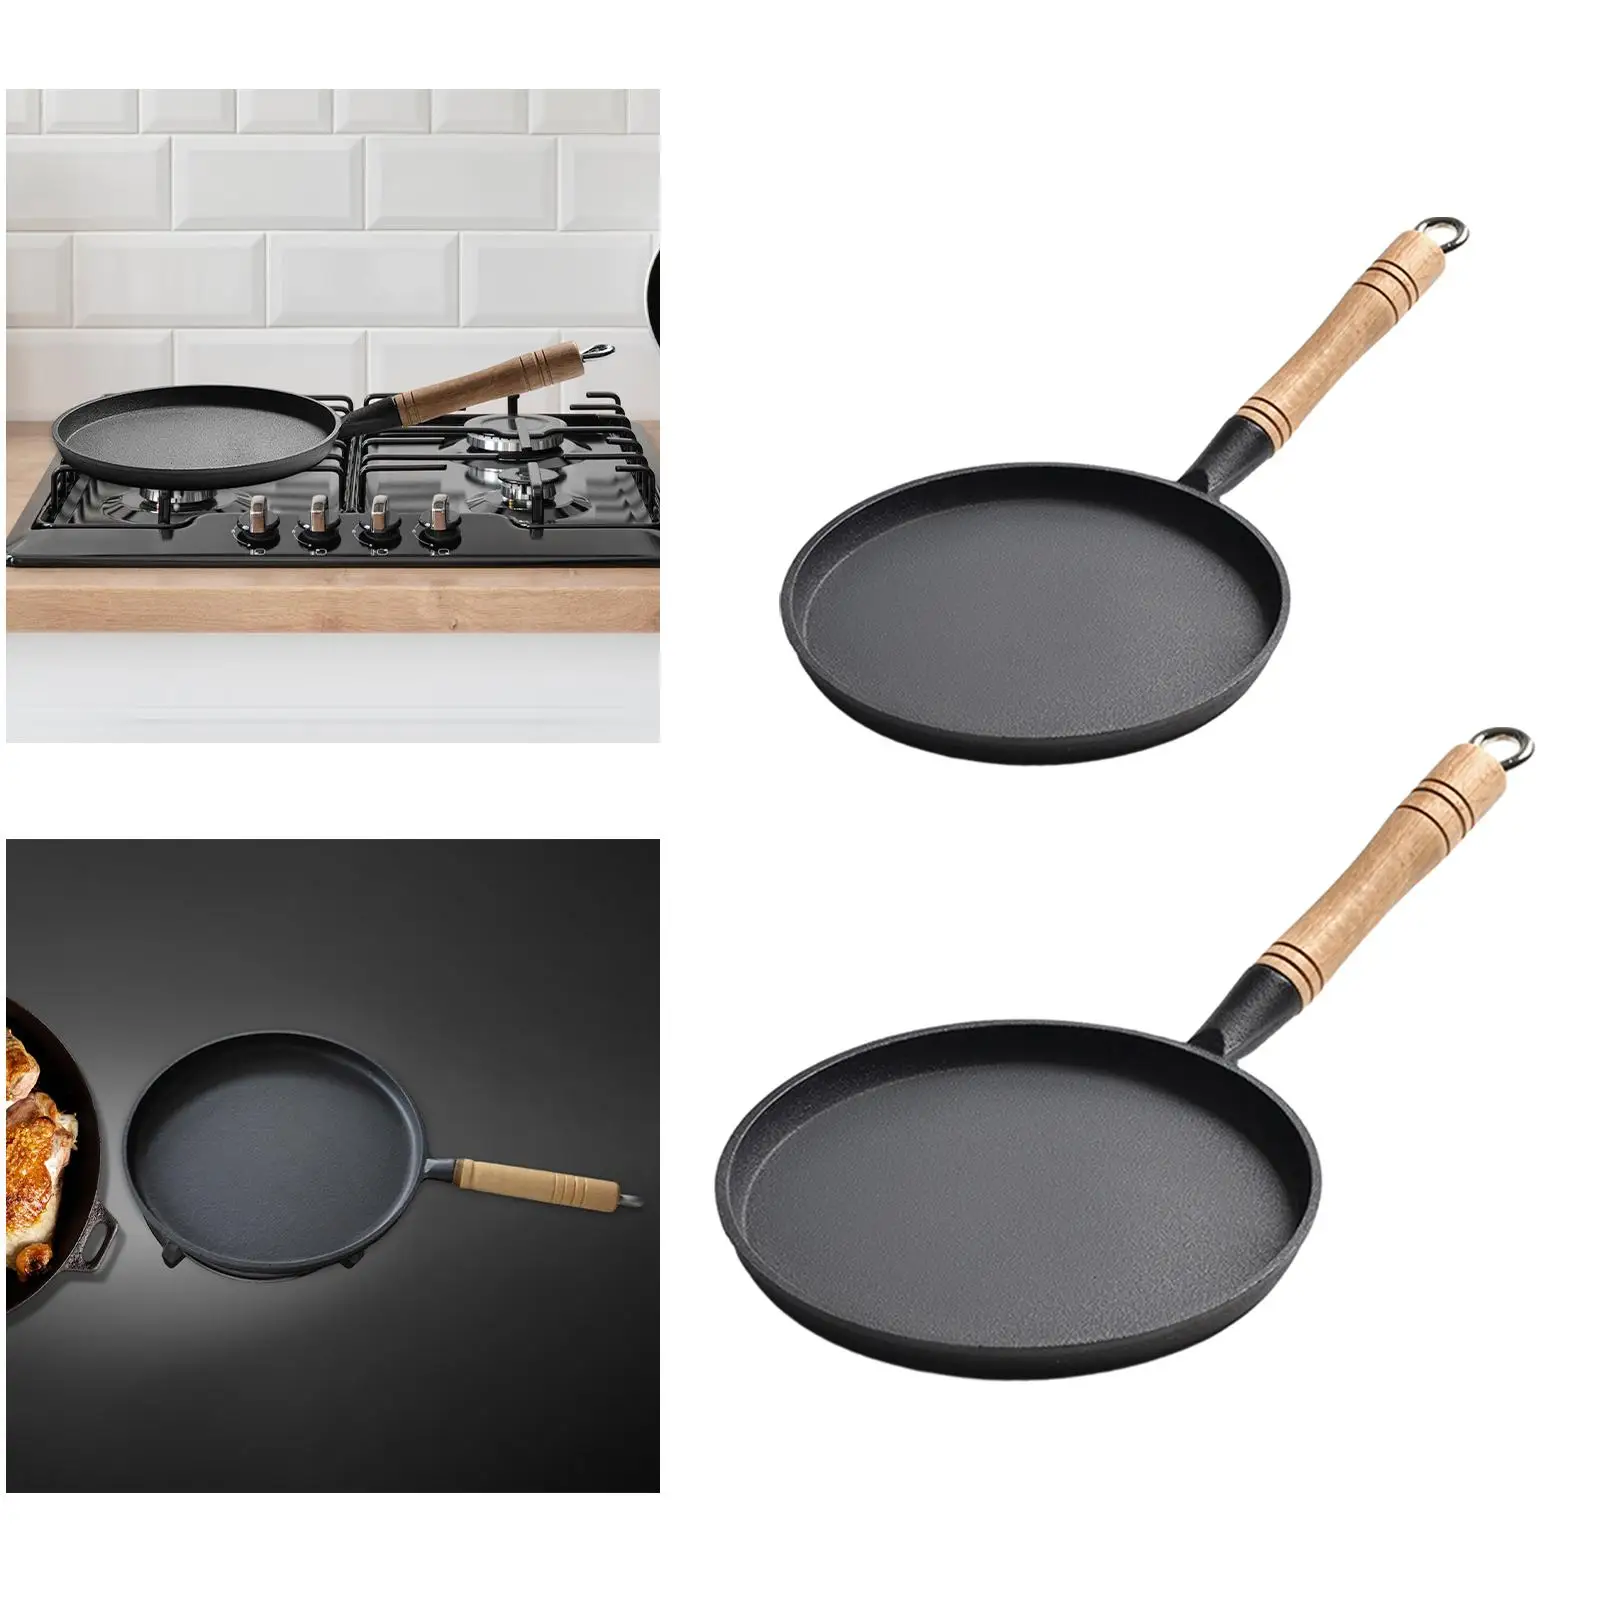 Heavy Gauge Crepe Pancake Pan Nonstick Frying Pan with Wooden Handle Cooking Omelette Pan for Kitchen Picnic Camping BBQ Outdoor